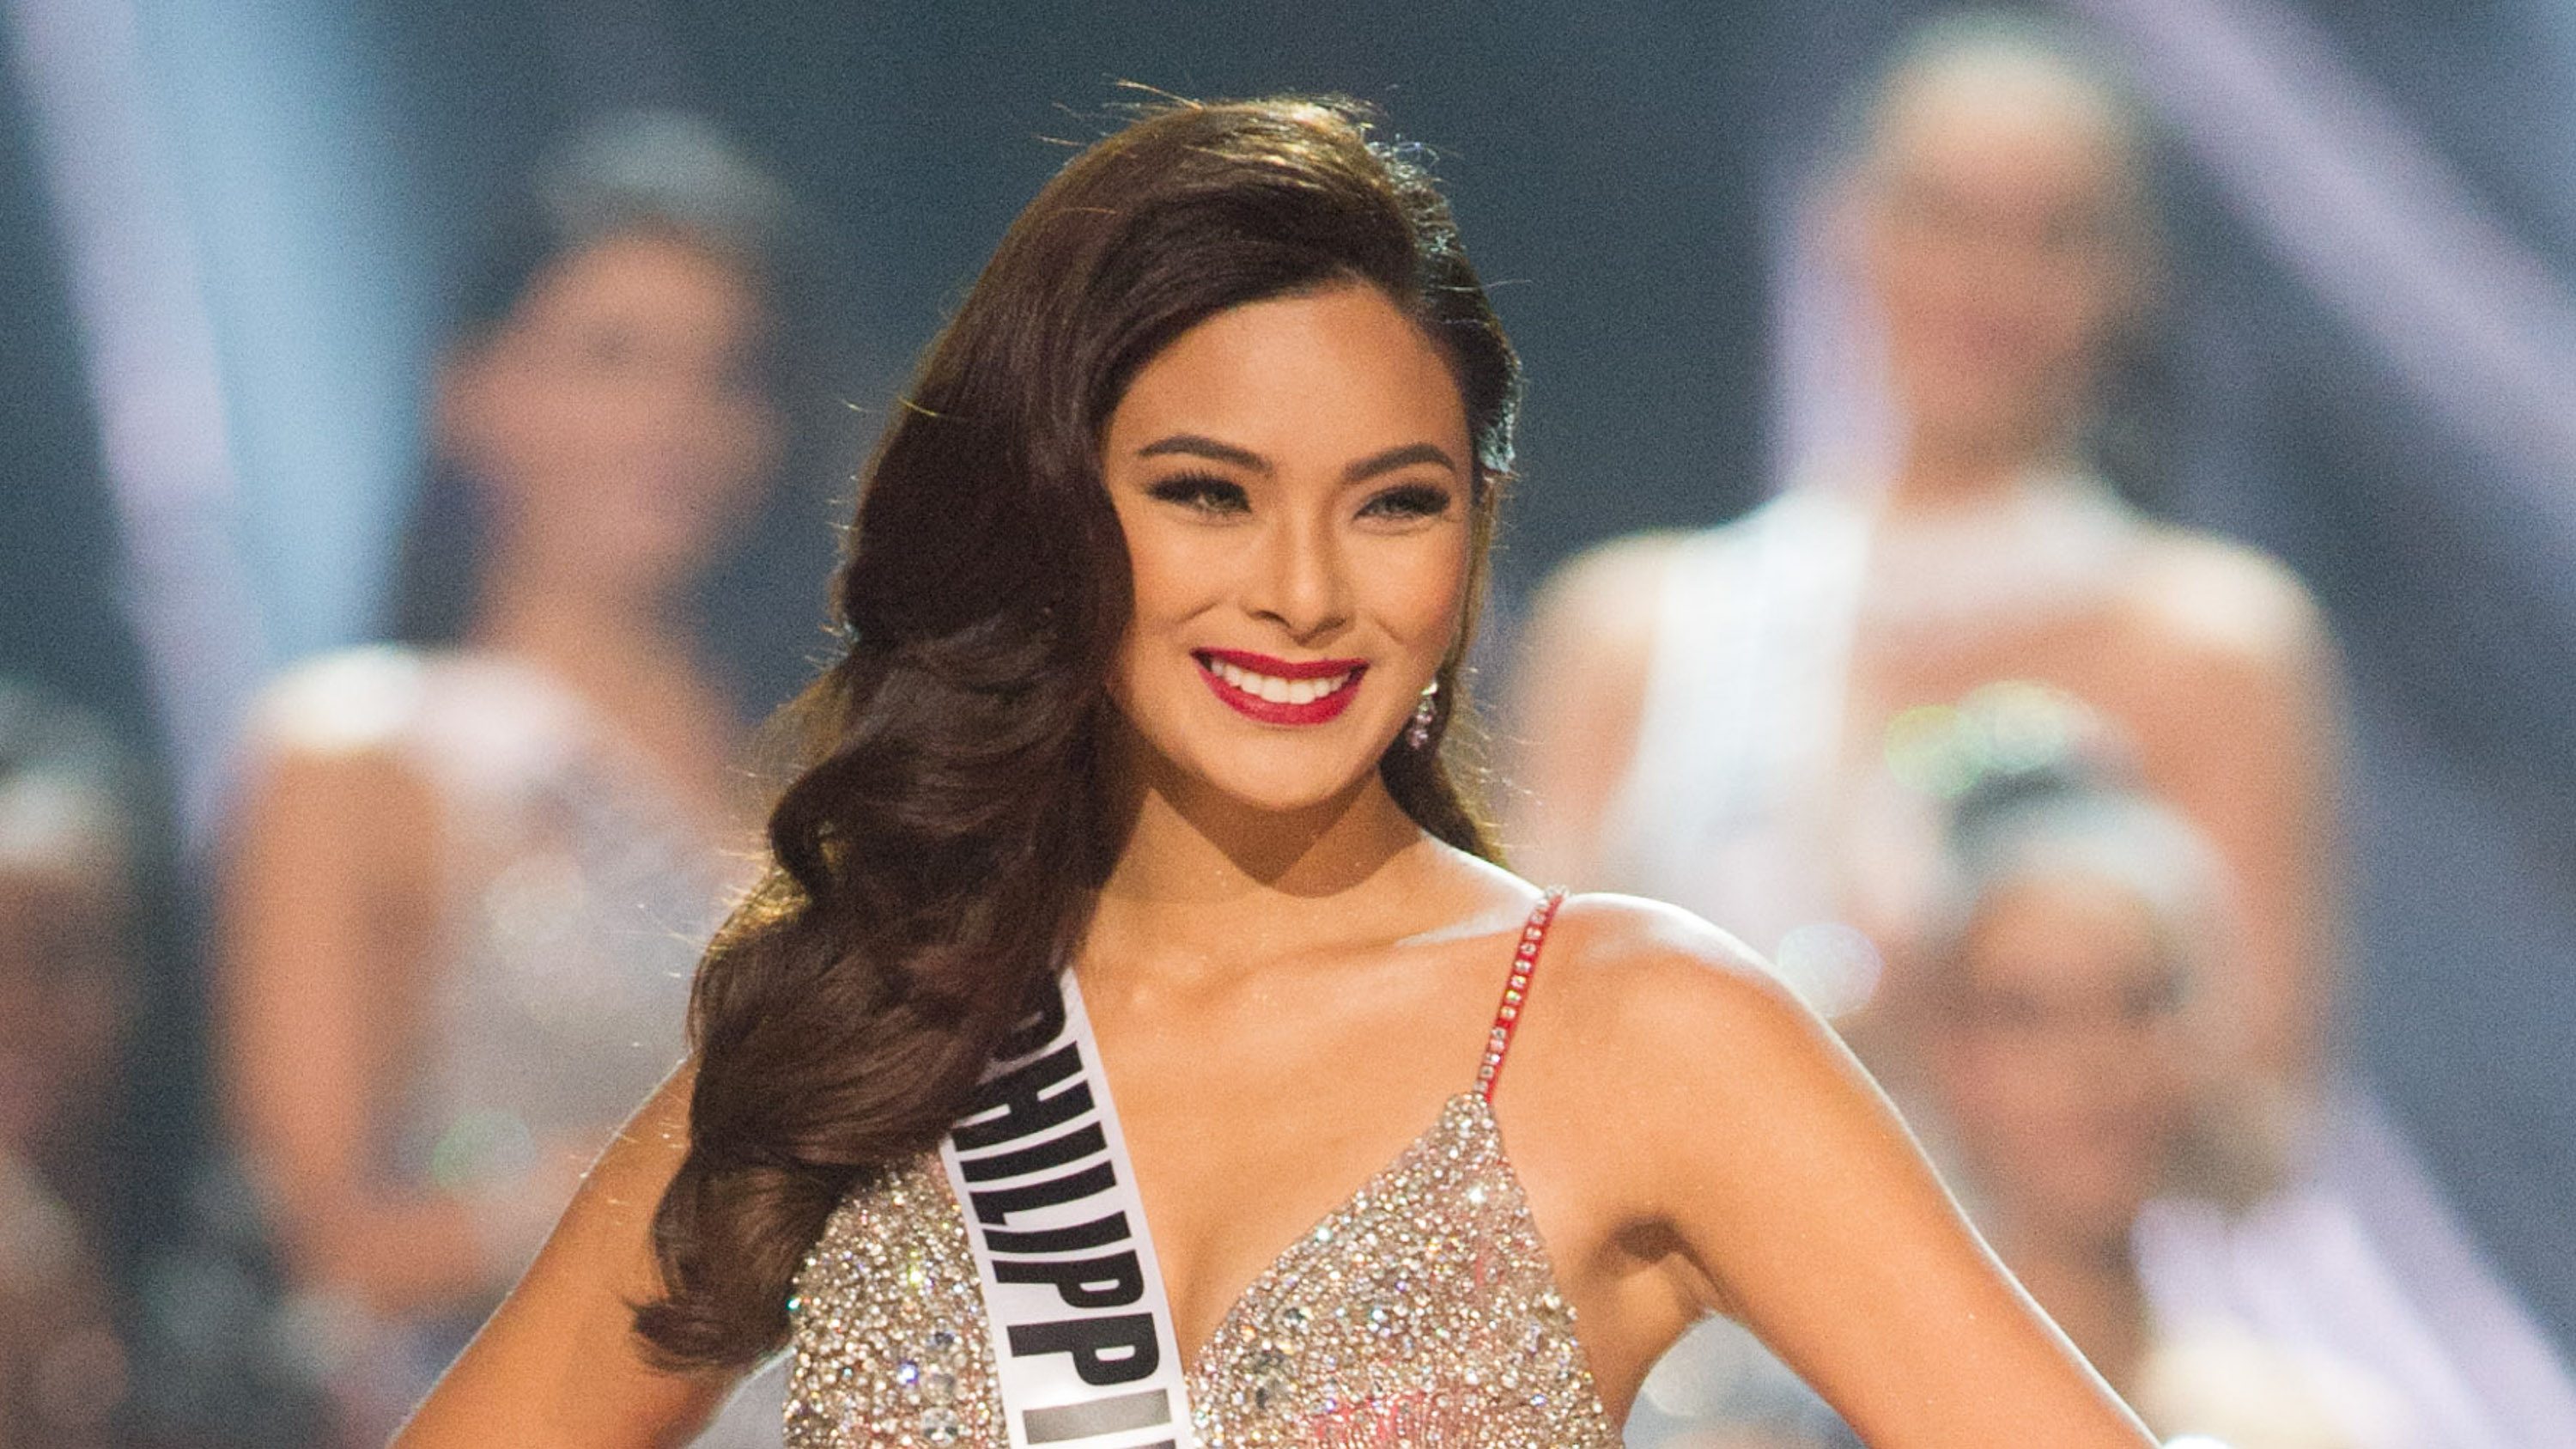 MISS PHILIPPINES. Maxine Medina finishes in the Top 6 at Miss Universe 2016. Photo courtesy of HO/Miss Universe Organization 